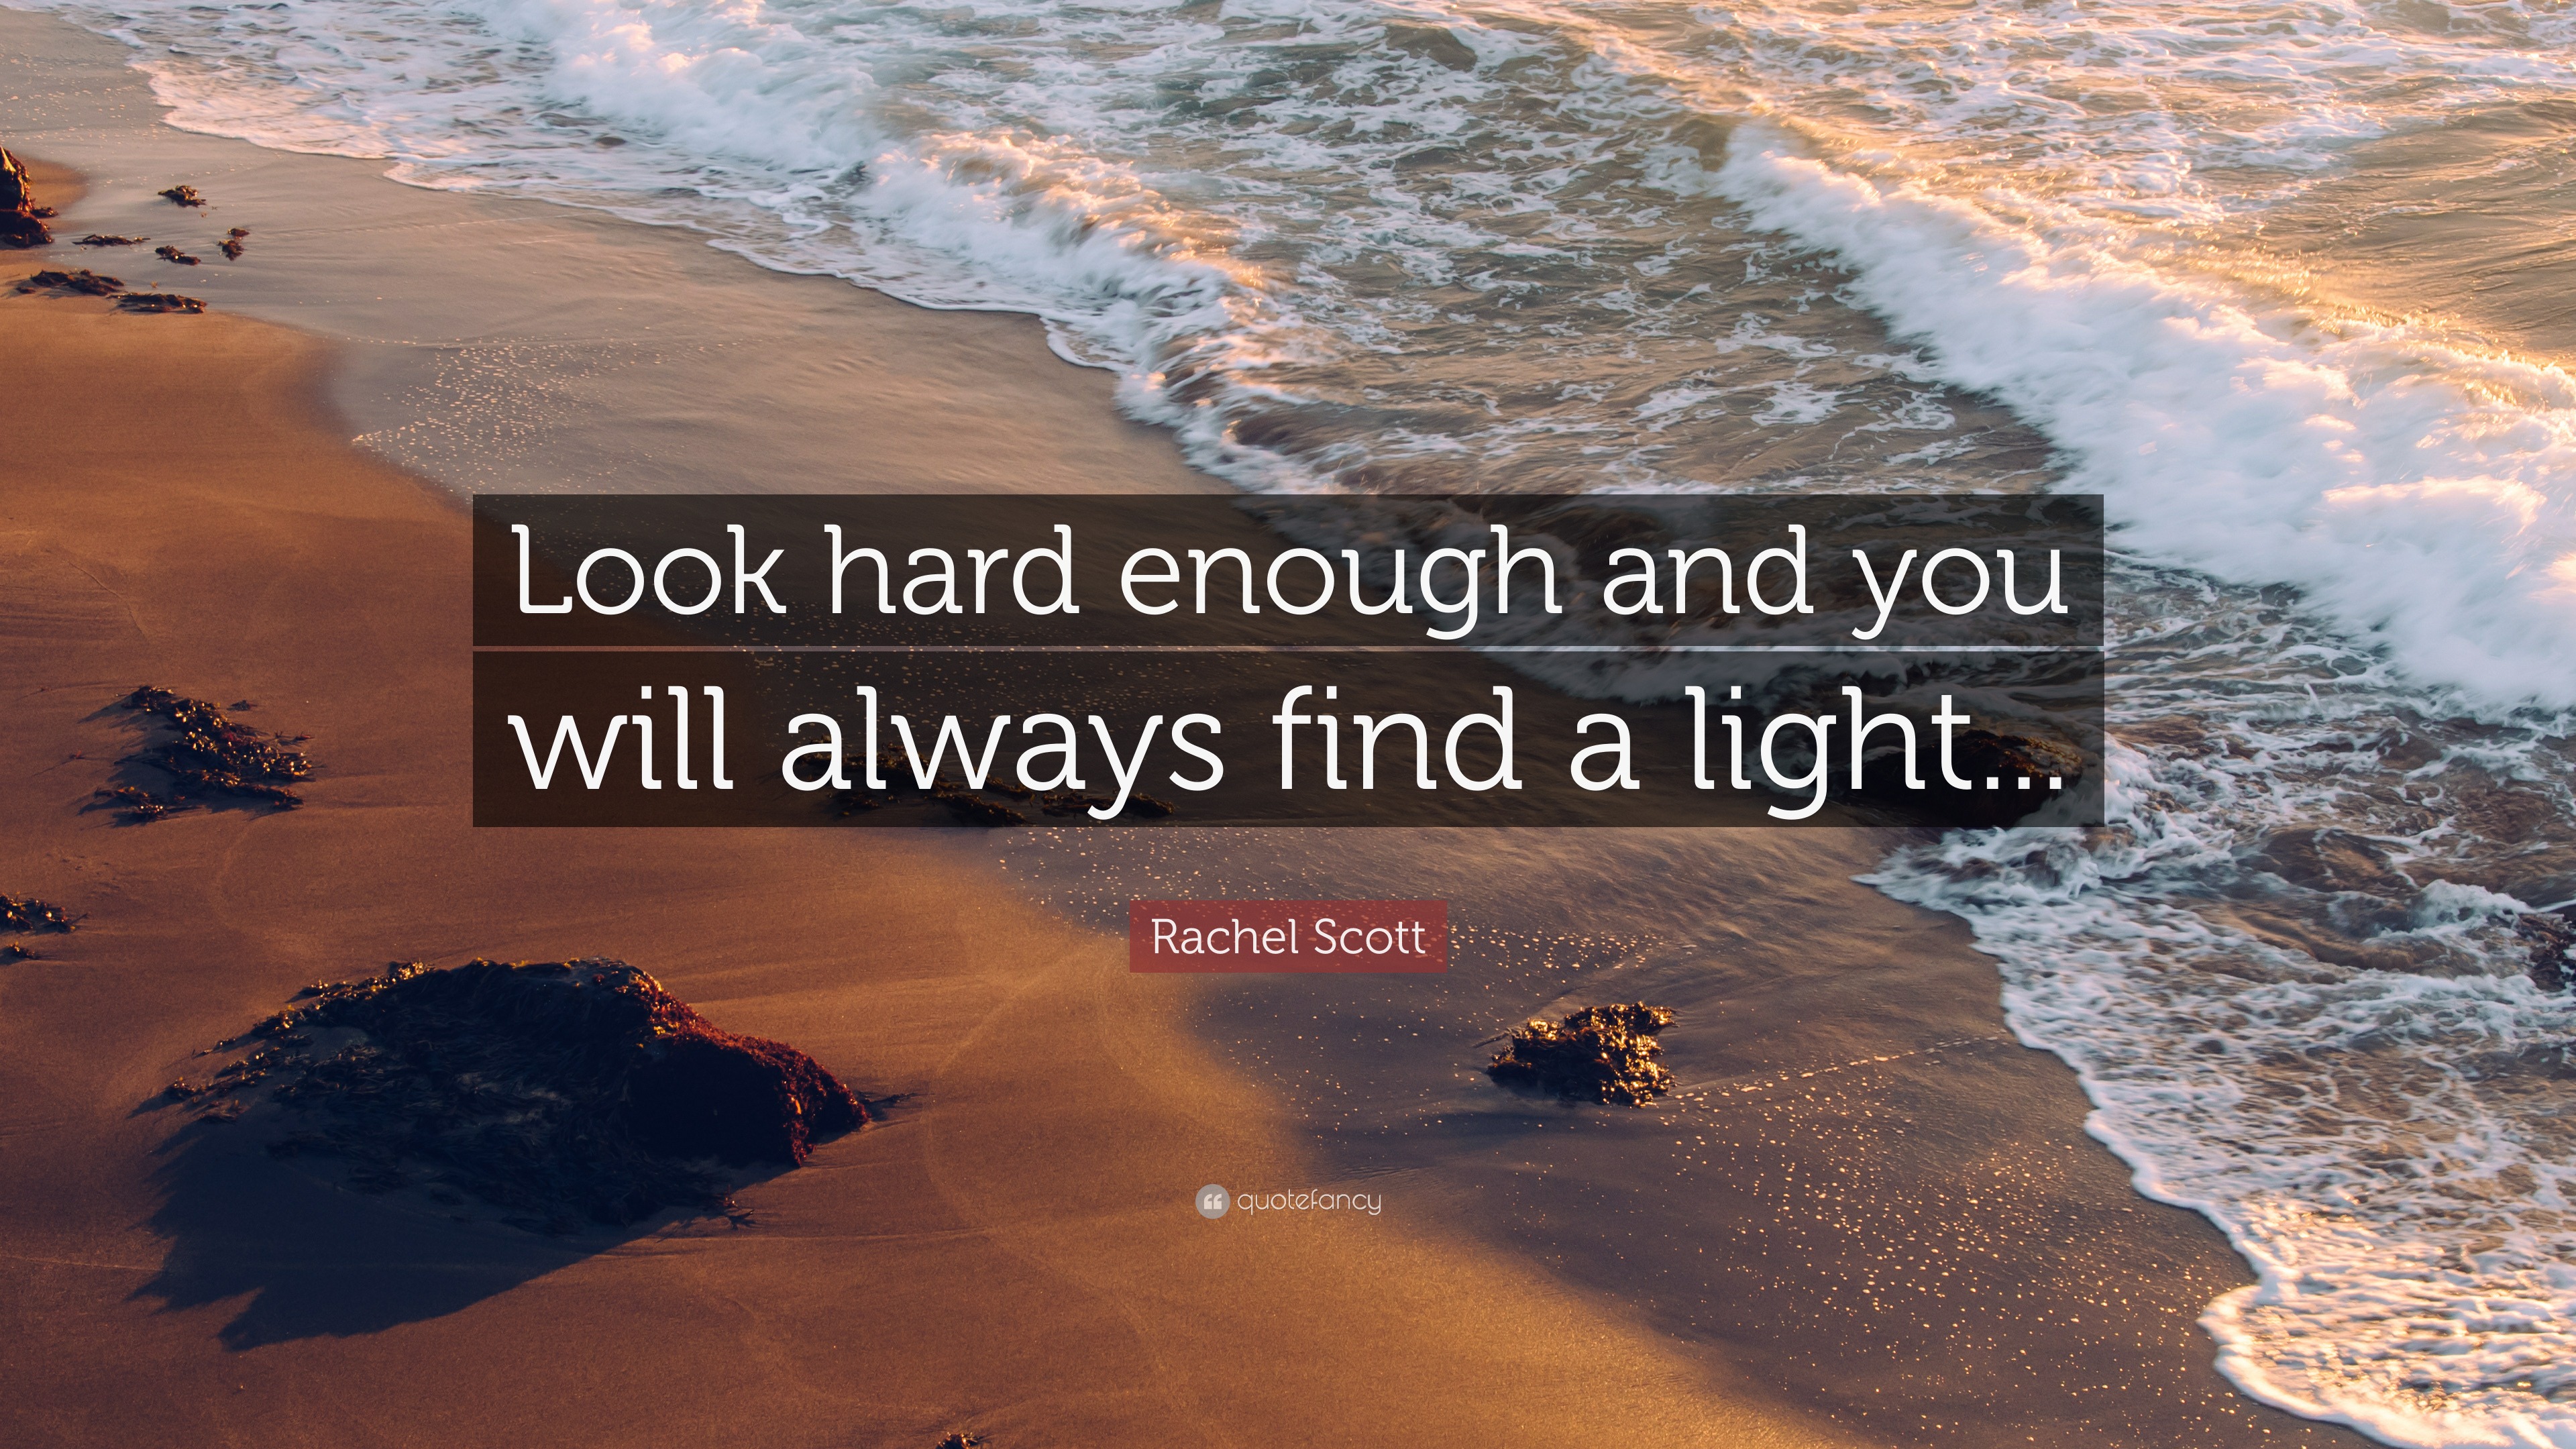 Rachel Scott Quote Look Hard Enough And You Will Always Find A Light 7 Wallpapers Quotefancy